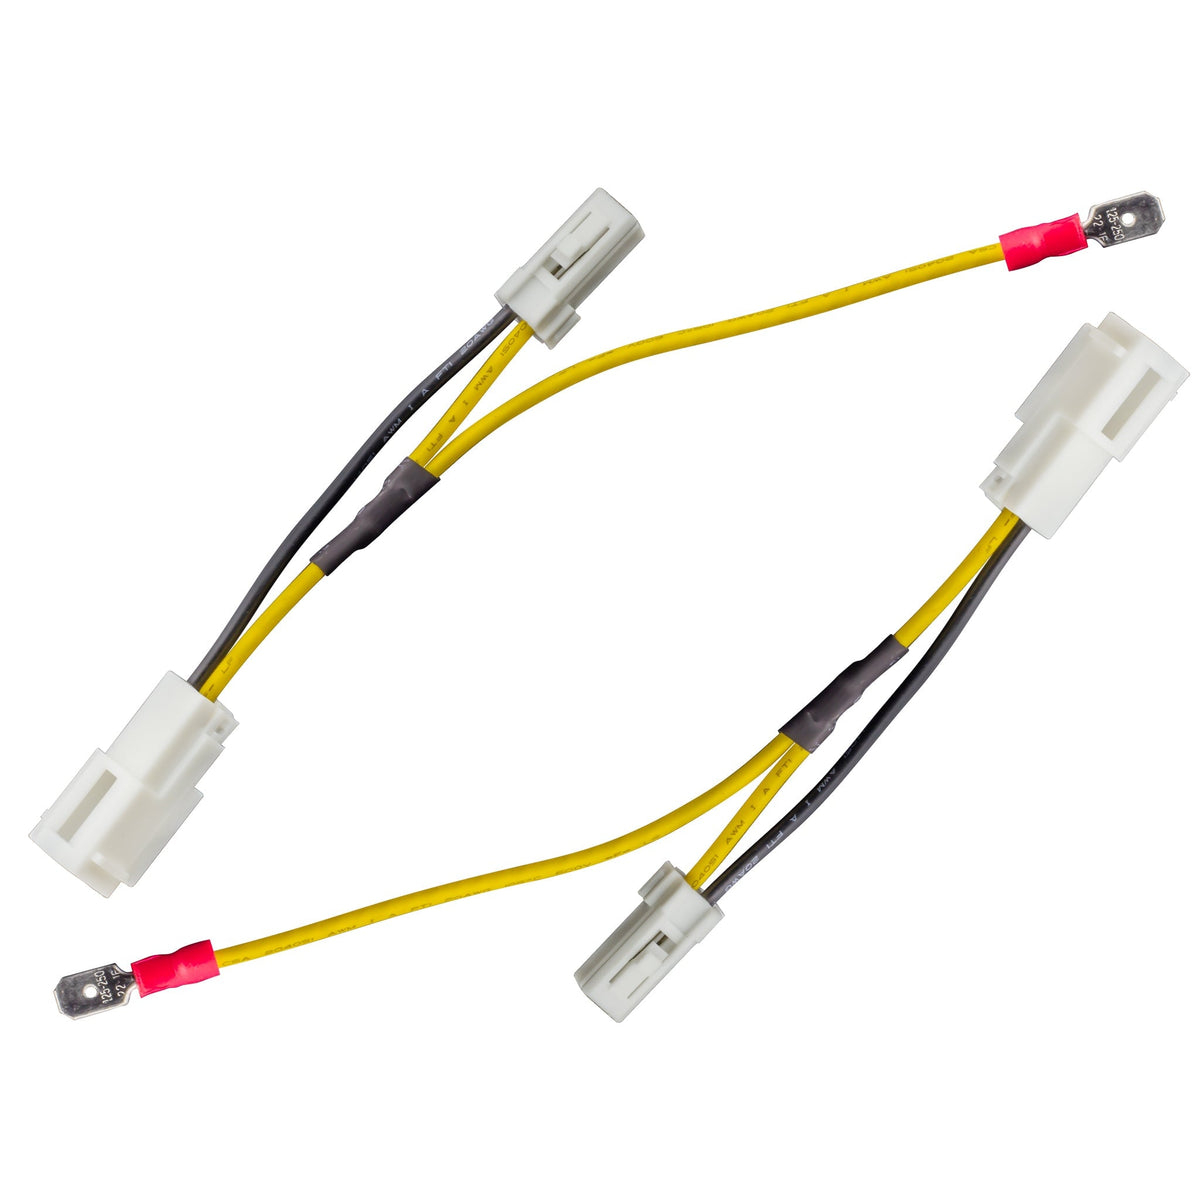 Eagle Lights Turn Signal Breakout Harness for Tail Lights with Integrated Turn Signals